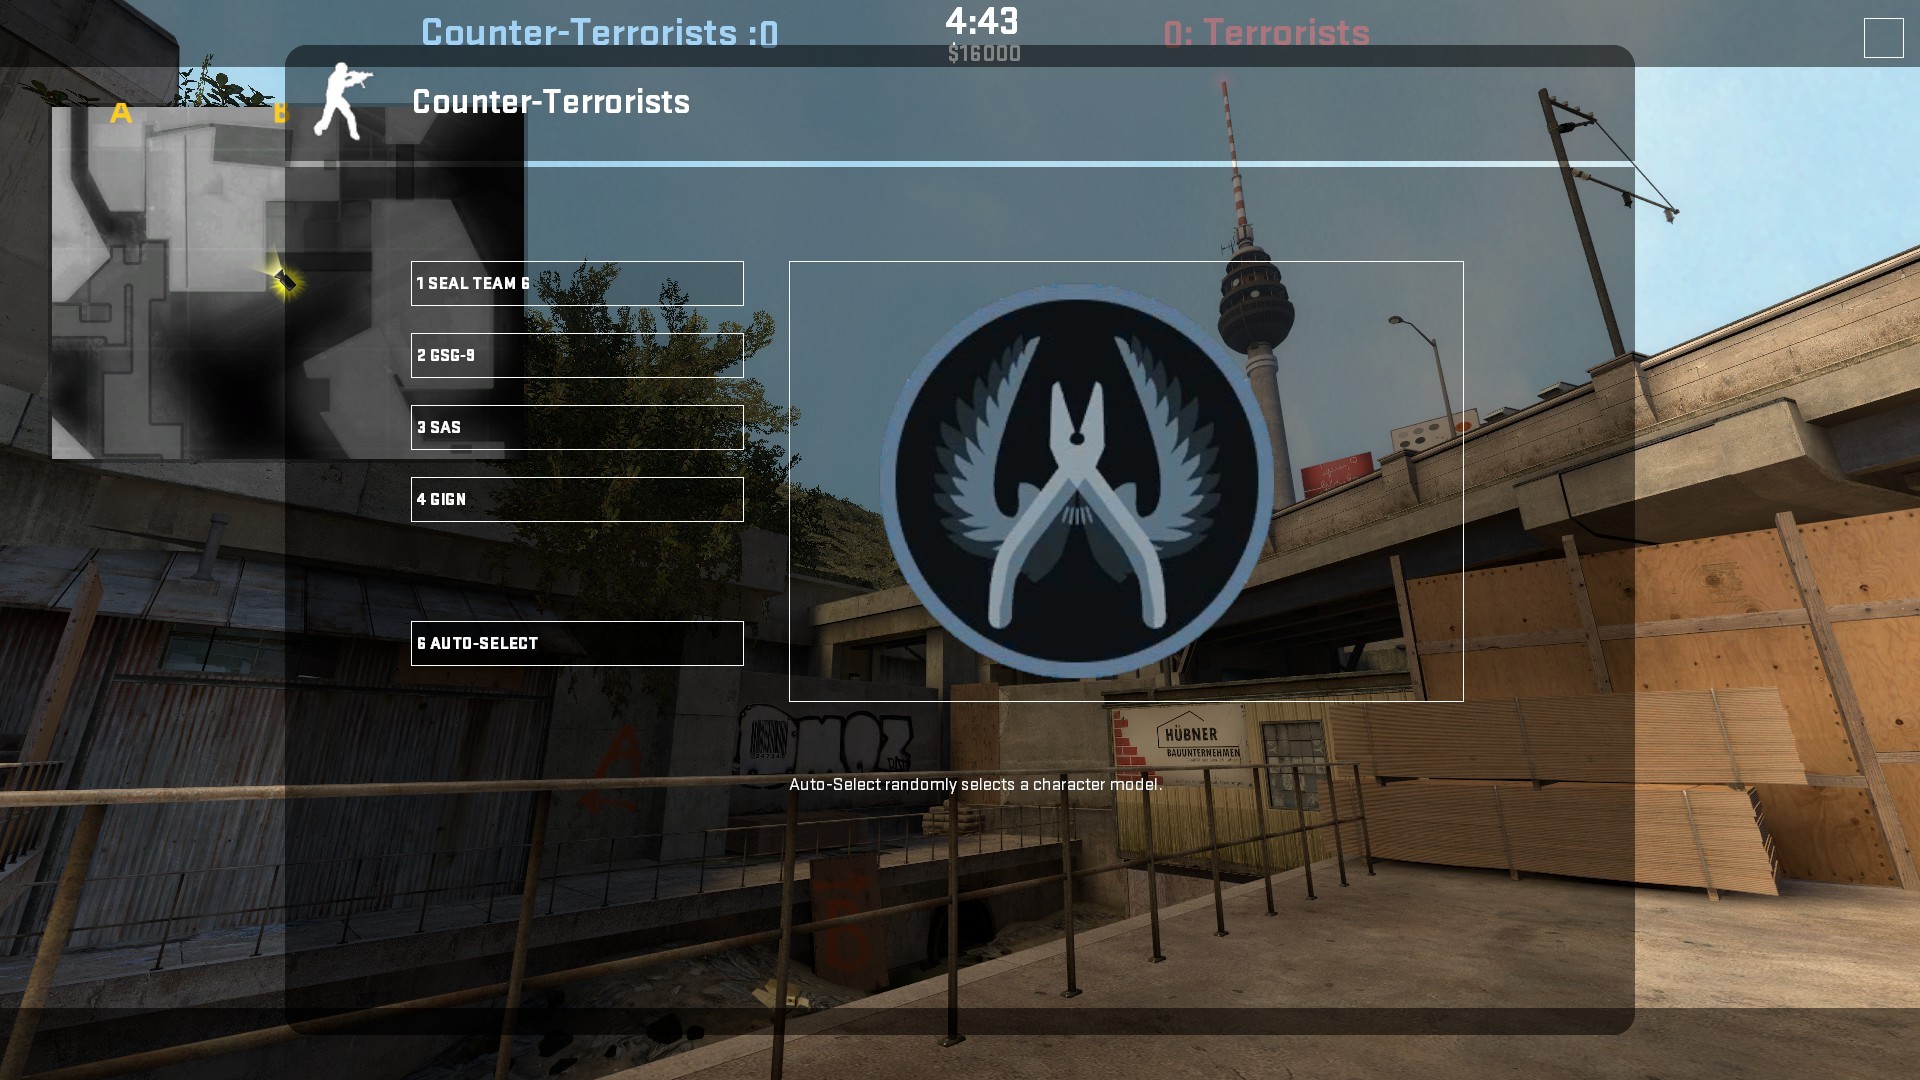 fixed buy menu for counter strike source ? - AlliedModders